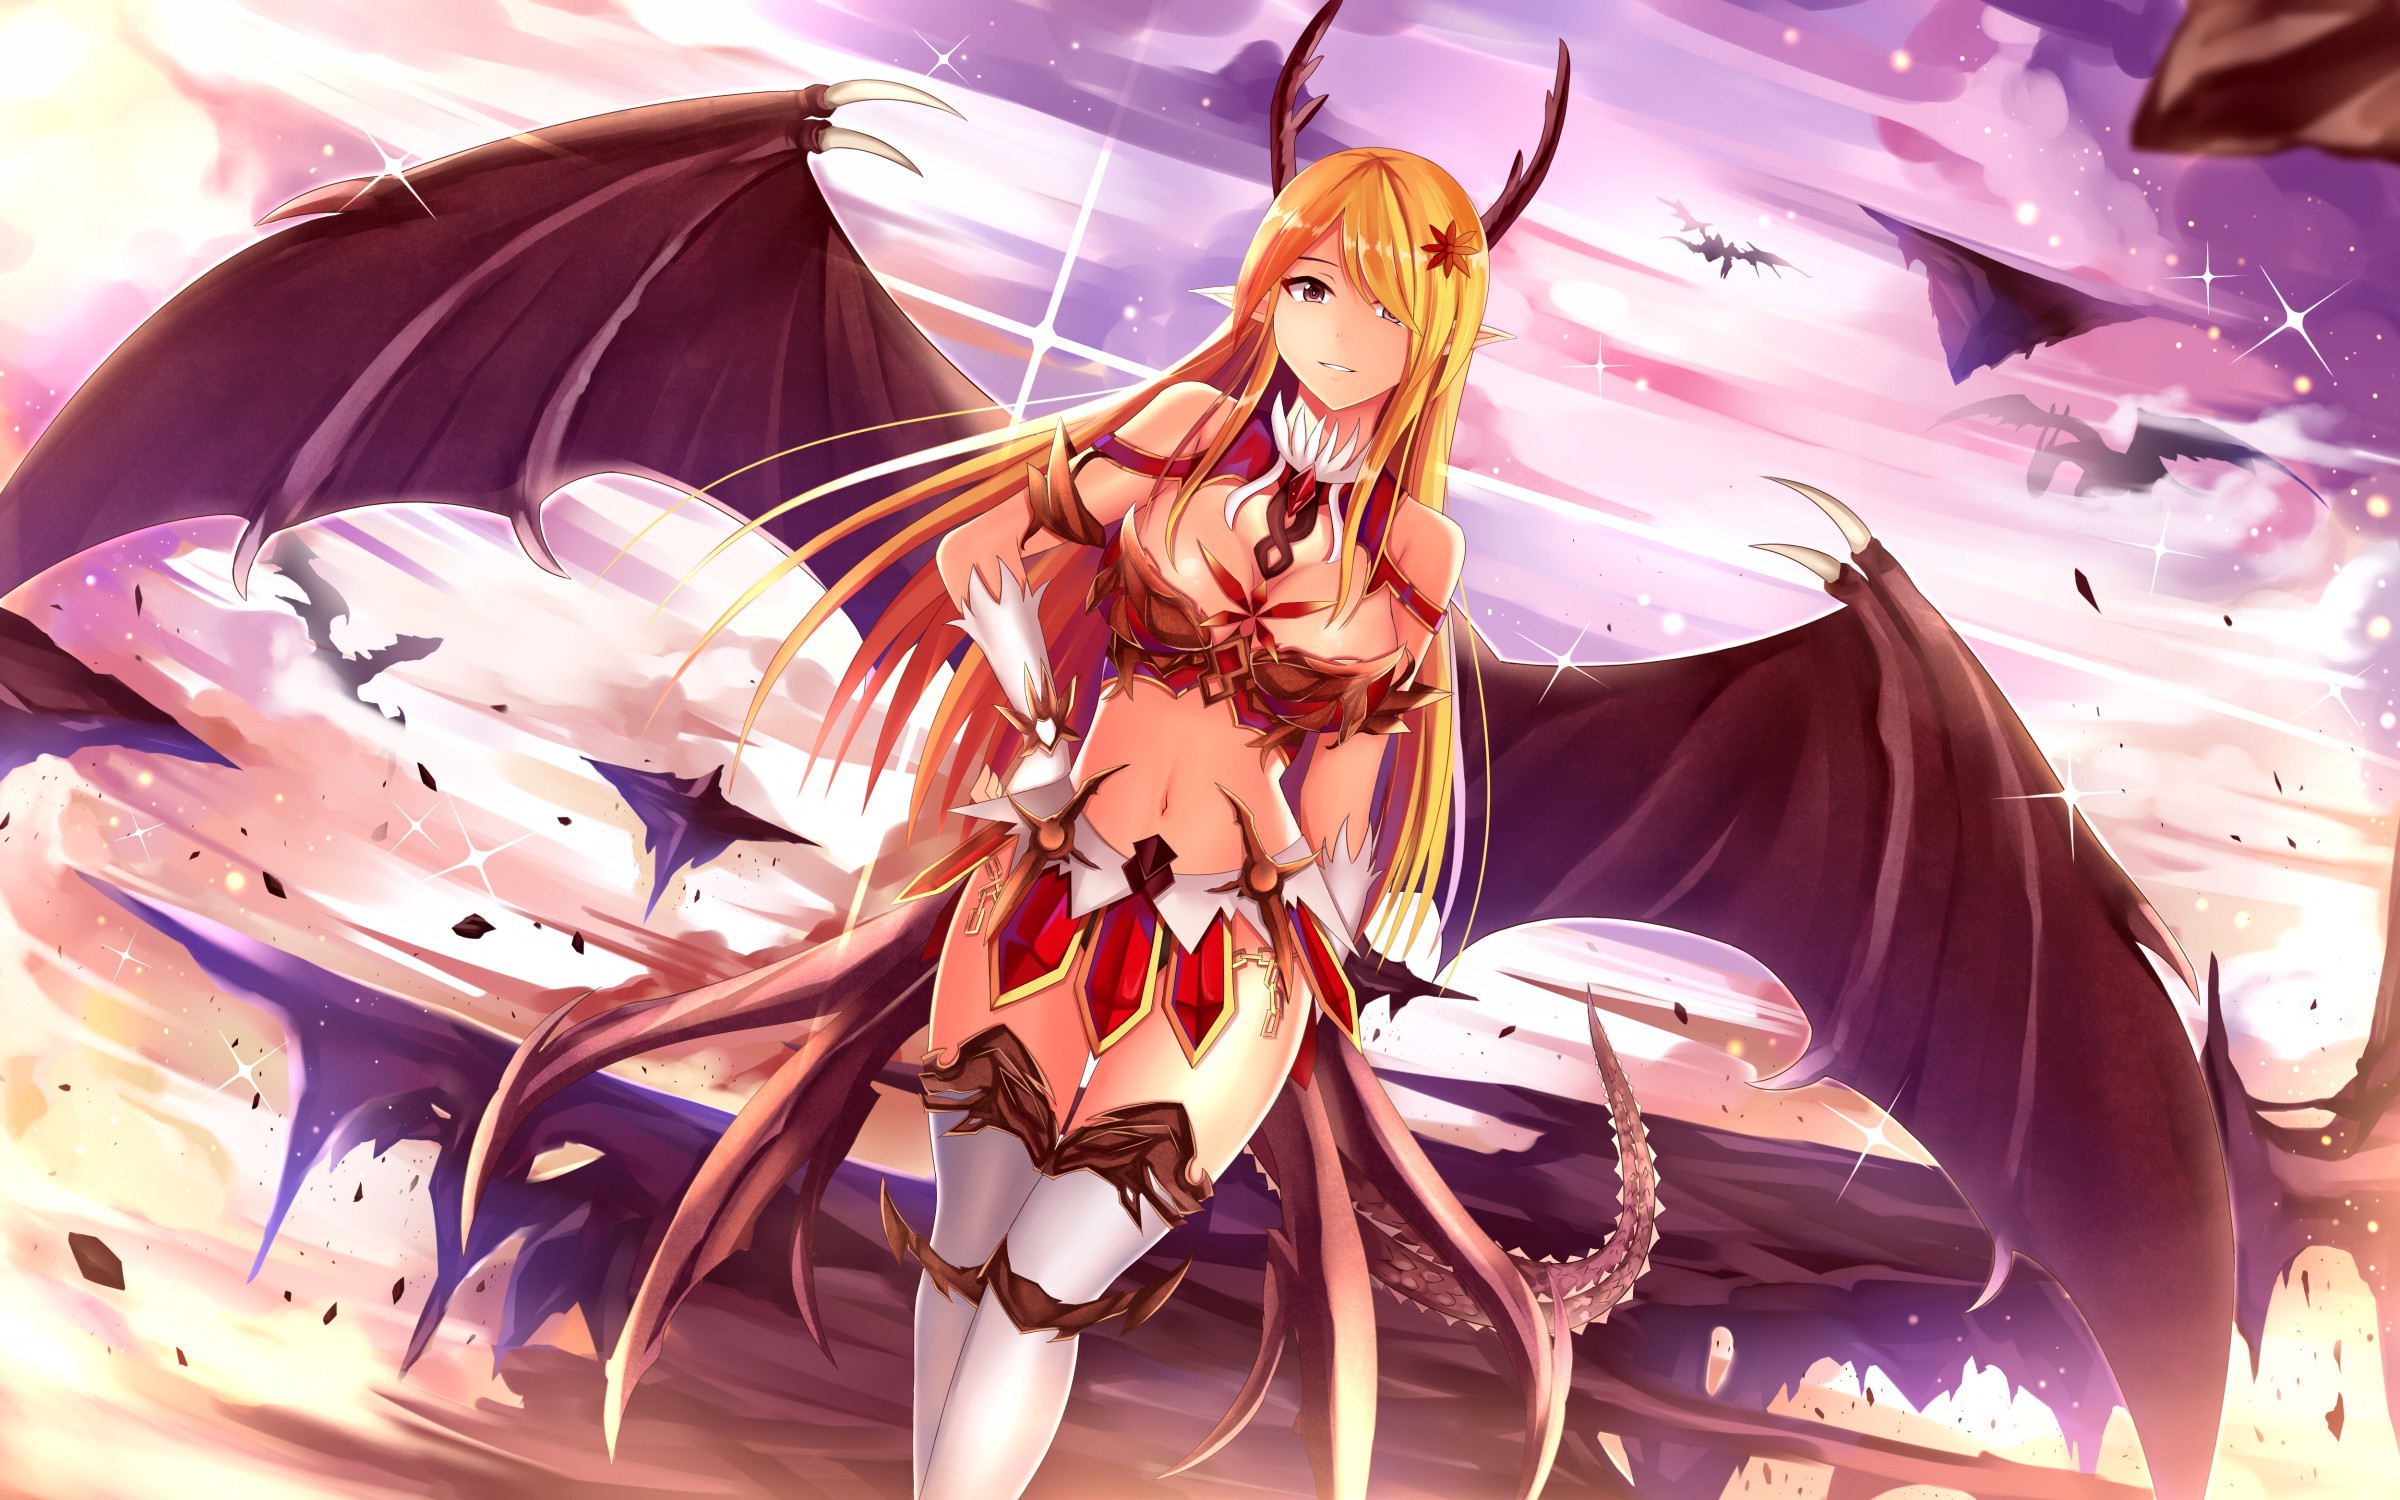 Anime 2400x1500 anime anime girls bikini top blonde cleavage demon elbow gloves flowers globes long hair belly button sky stockings wings elves dragon thigh-highs antlers